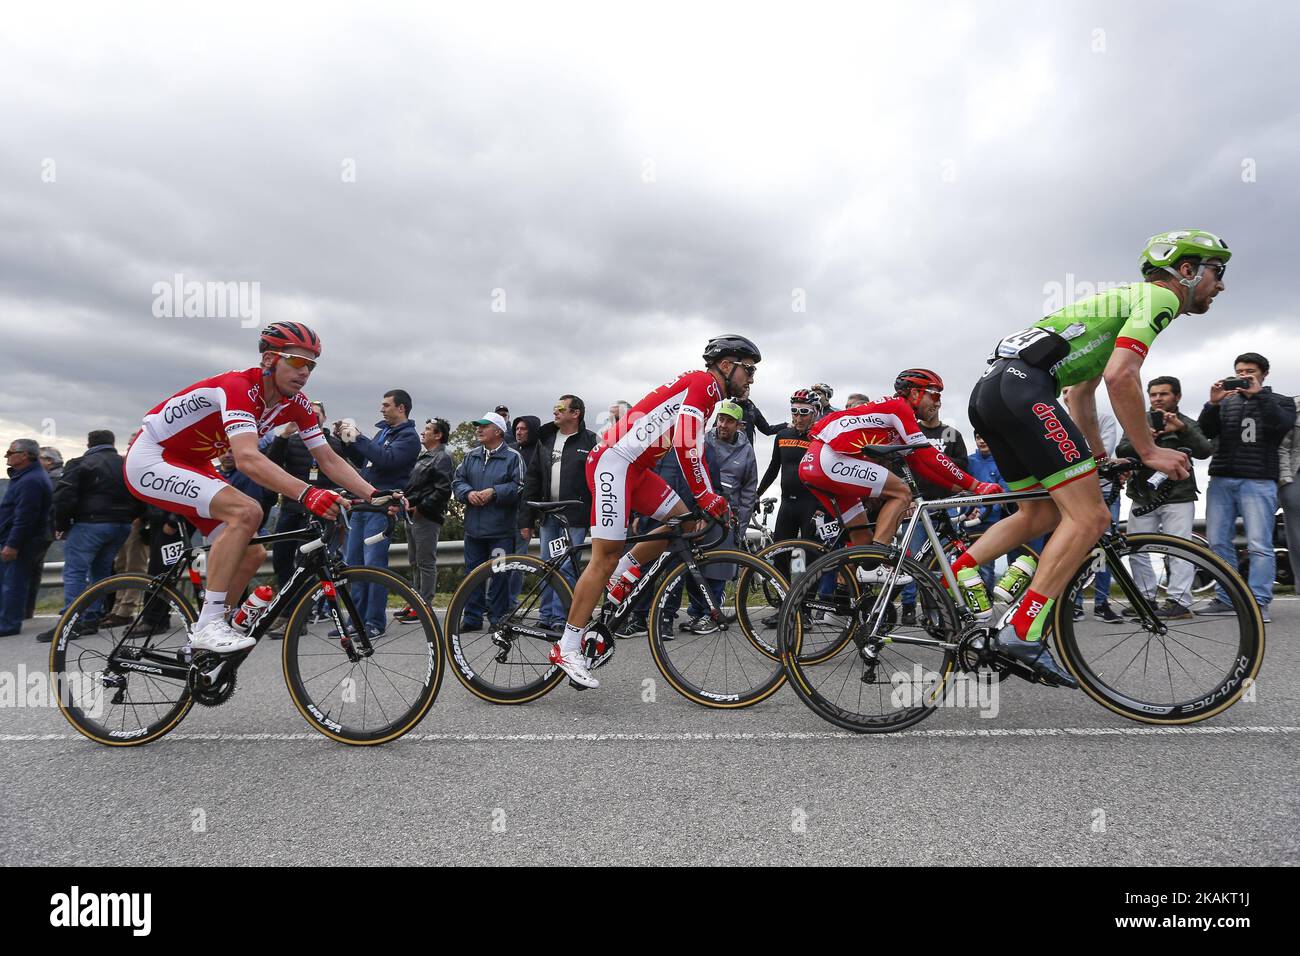 Kenneth Vanbilsen (L), Nacer Bouhanni (2L) and Jonas Van Genechten (3L) of Cofidis and Taylor Phinney (R) of Cannondale Drapac during the 5th stage of the cycling Tour of Algarve between Loule and Malhao, on February 19, 2017. (Photo by Filipe Amorim/NurPhoto) *** Please Use Credit from Credit Field *** Stock Photo